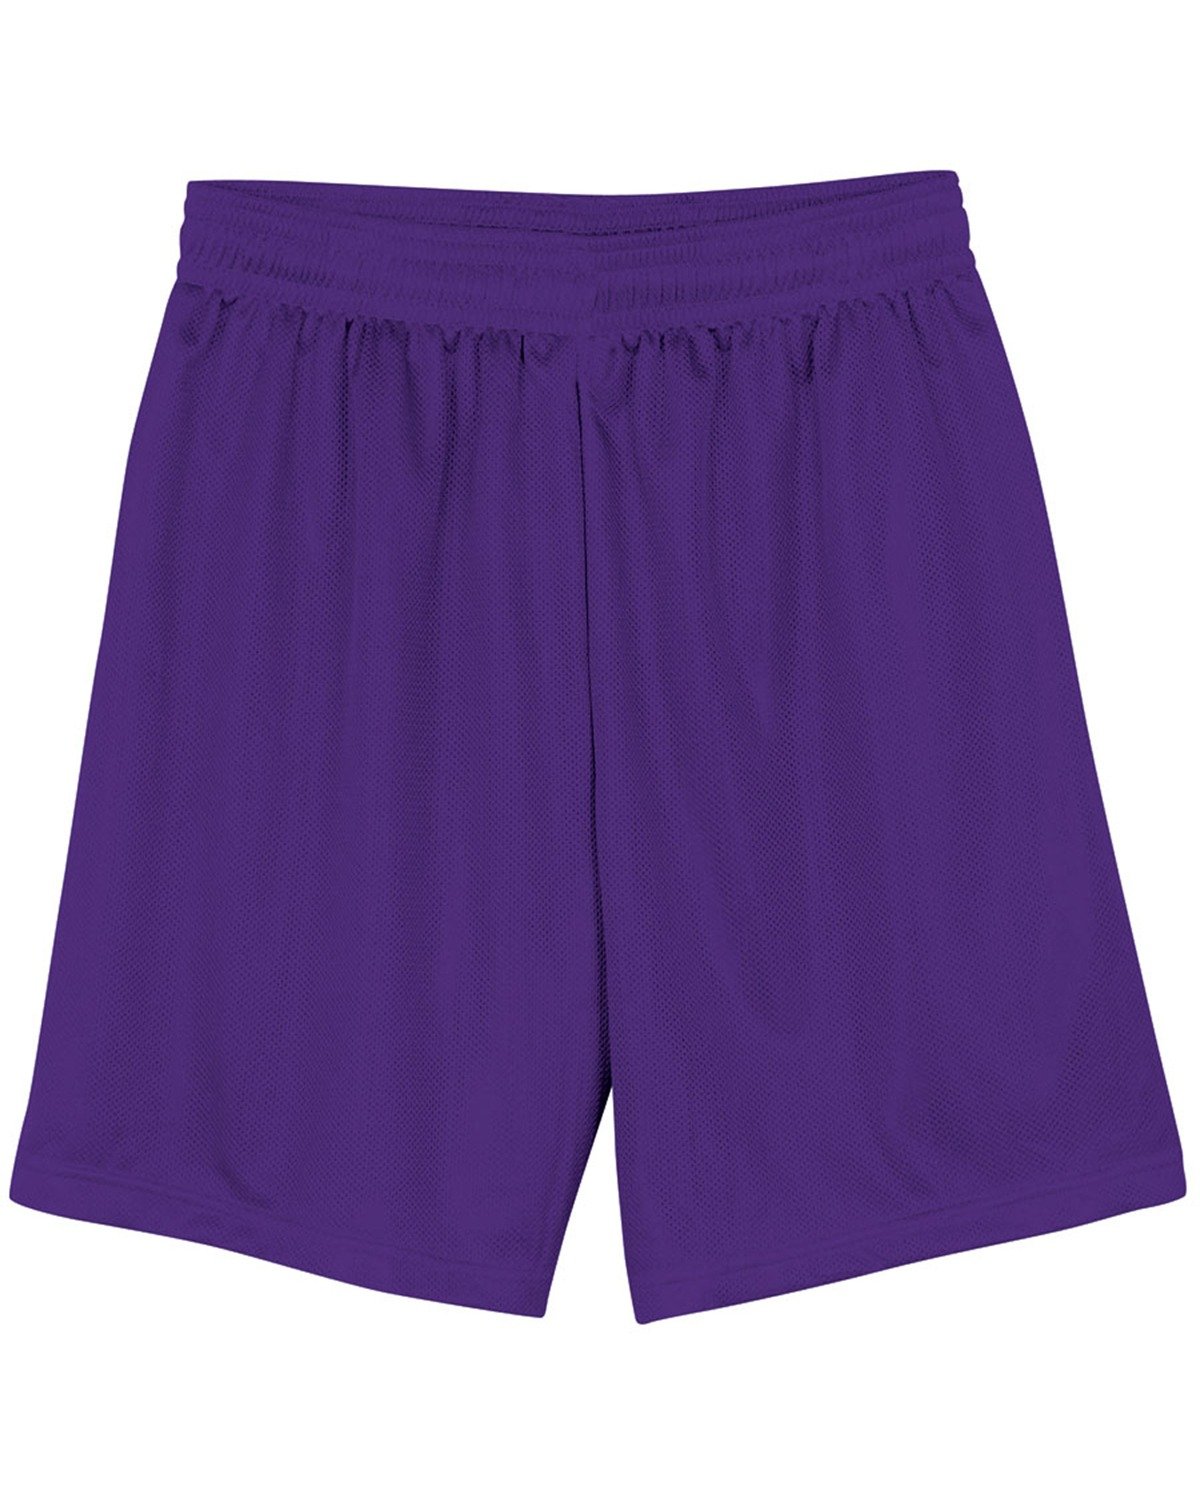 A4 Men's 7 Inseam Lined Micro Mesh Shorts